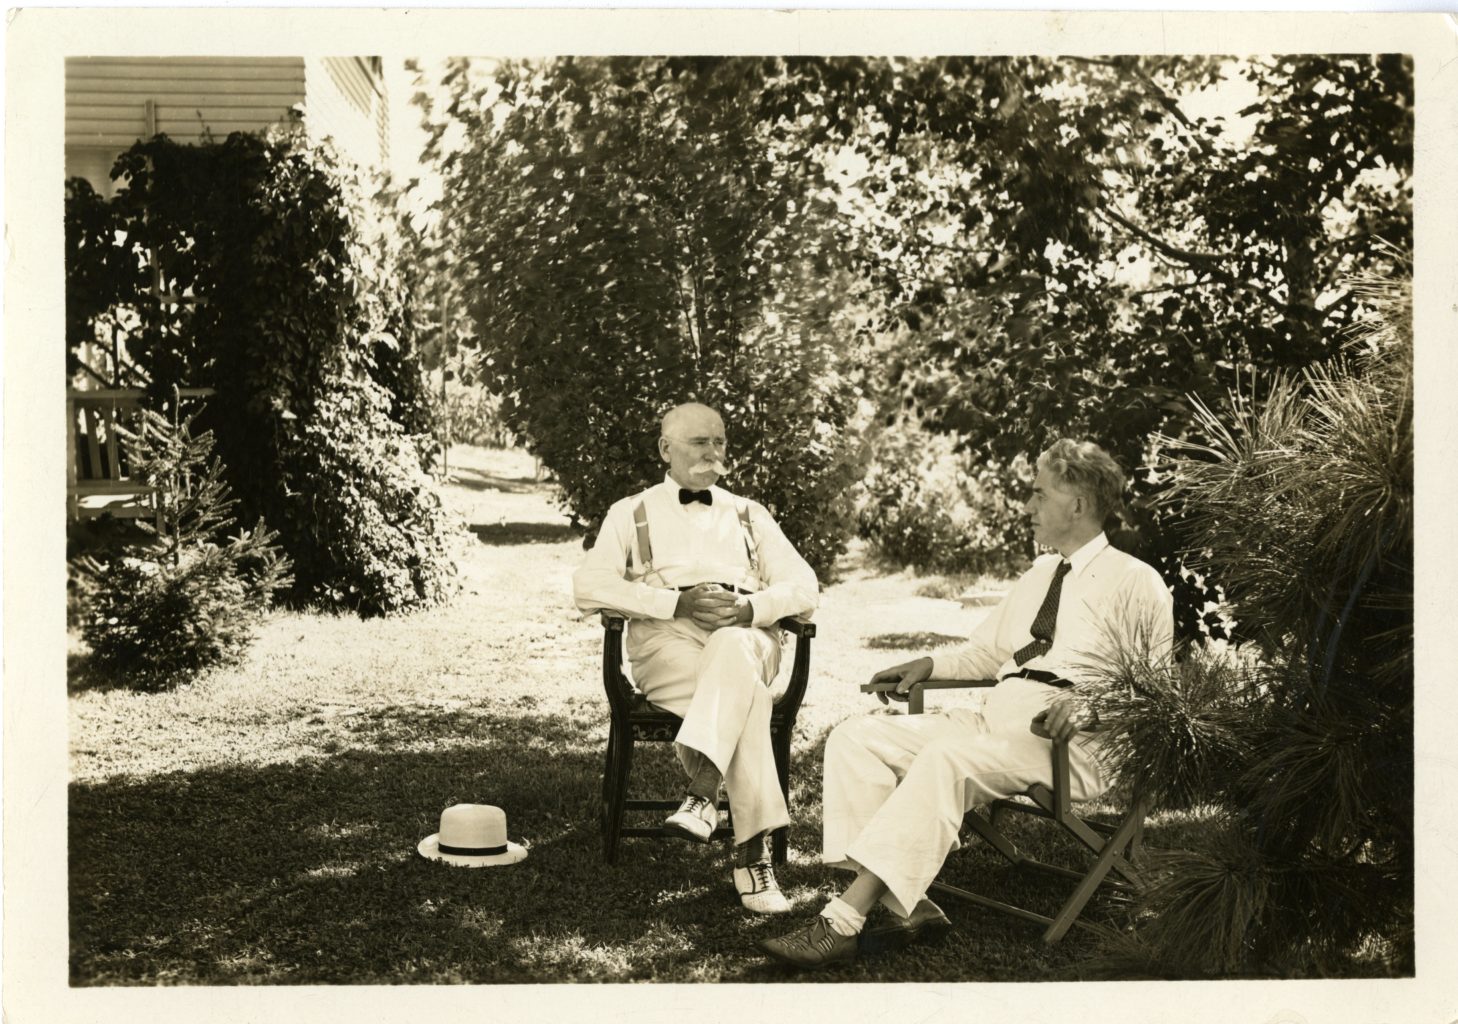 Two men sit outside together.